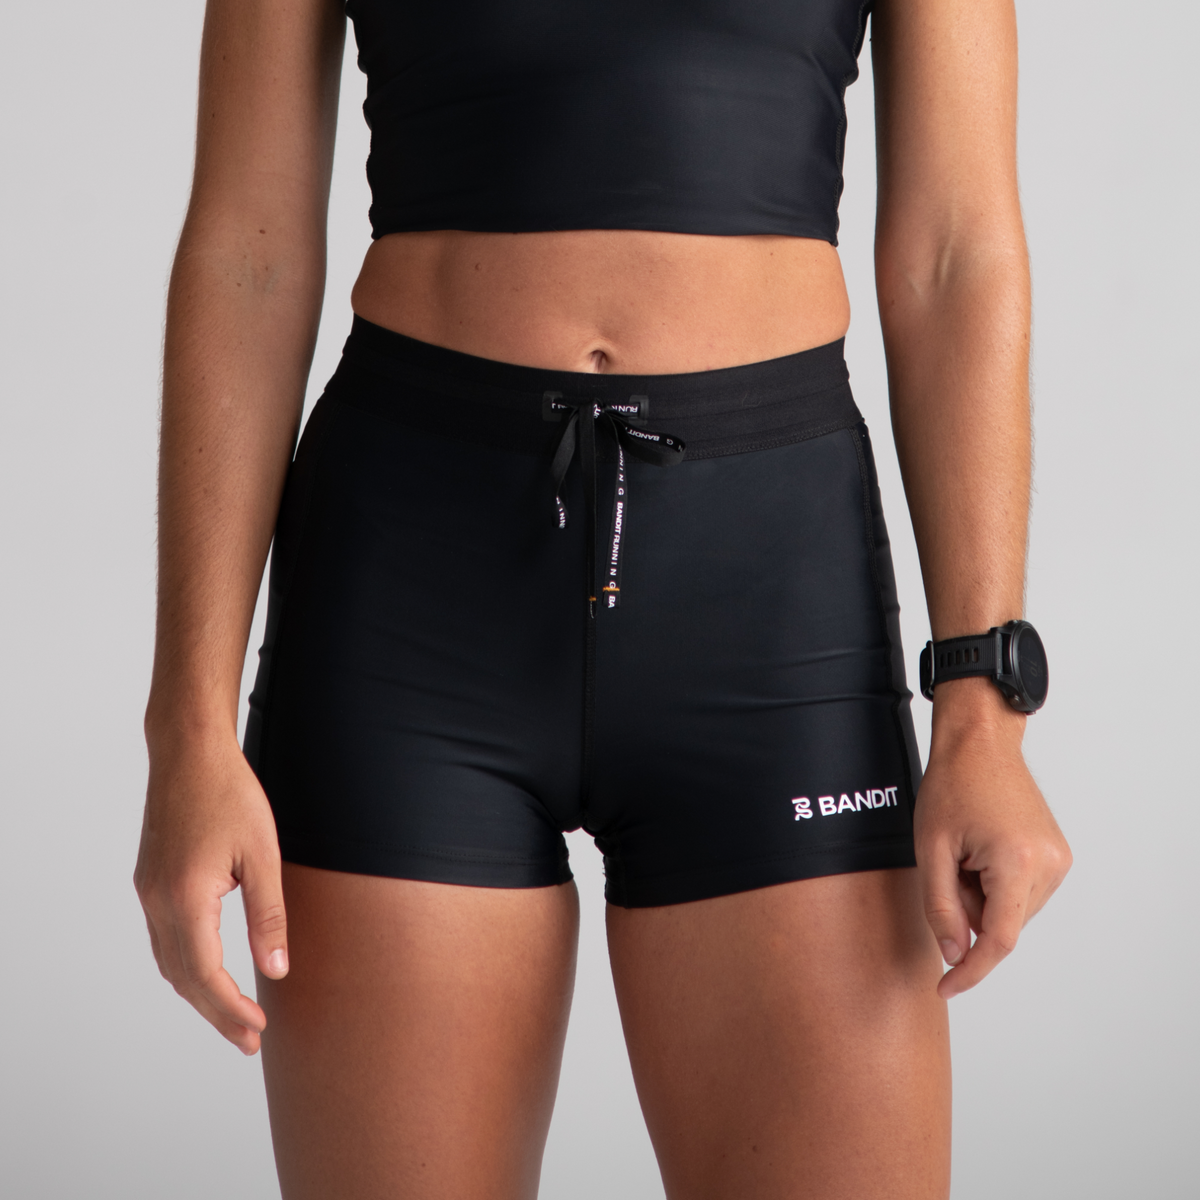 New - Workout Activewear Tops – NewNew Fashion wear